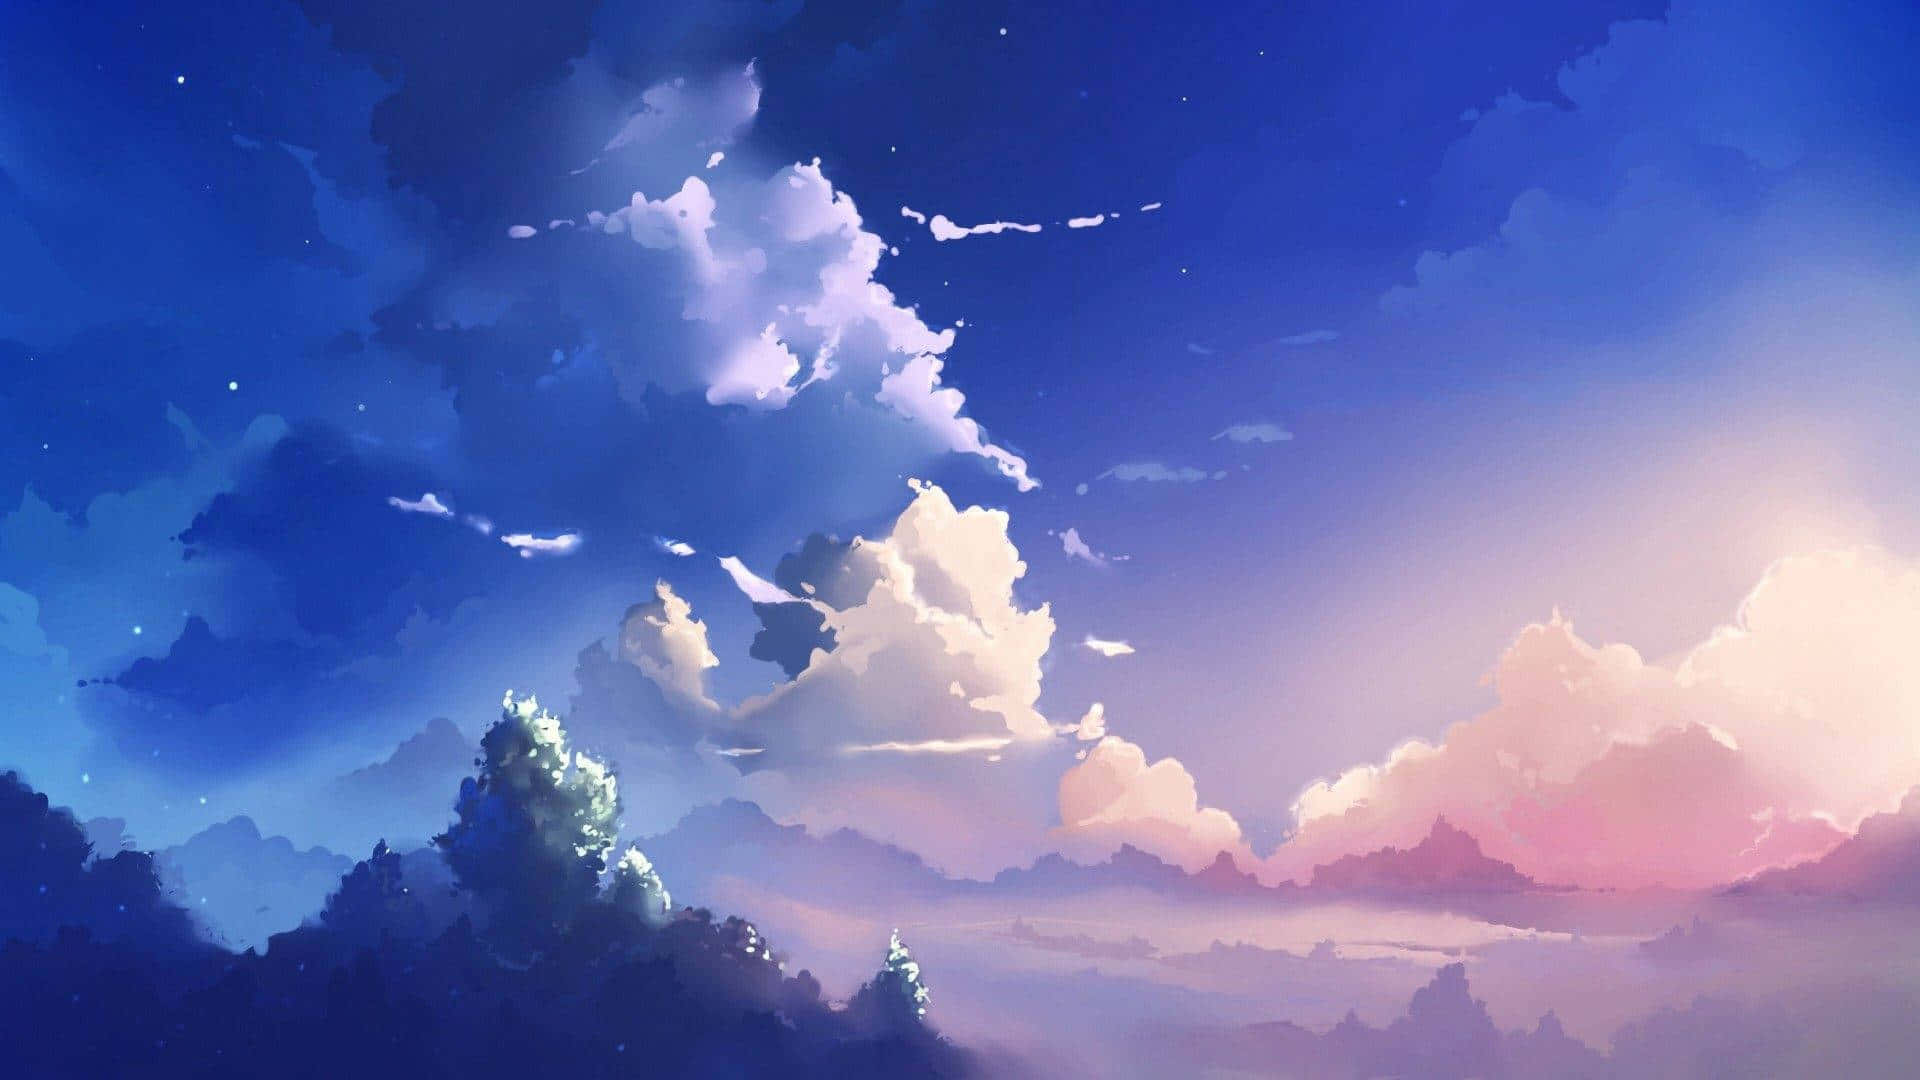 Download Aesthetic Anime Background 1920 x 1080 